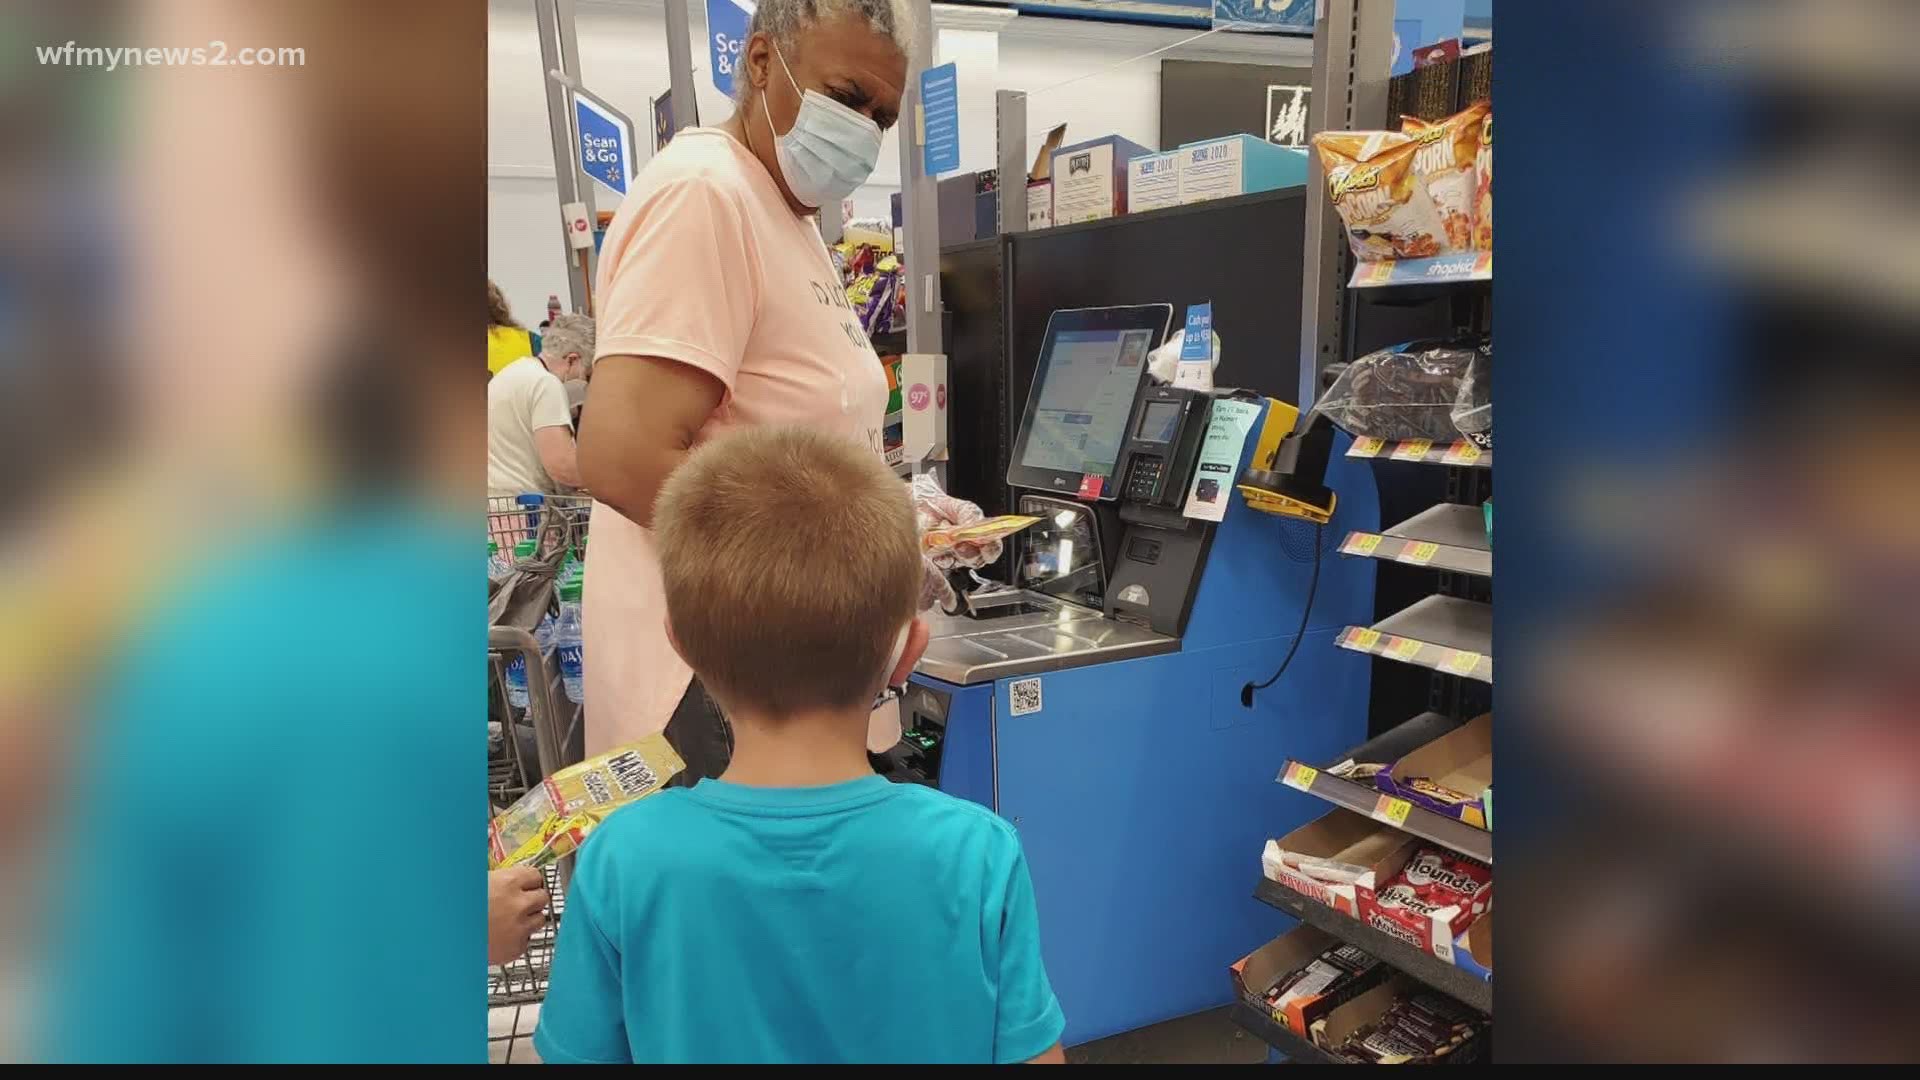 Bobby Clayton was buying Fourth of July supplies with his two sons when a complete stranger struck up a conversation.